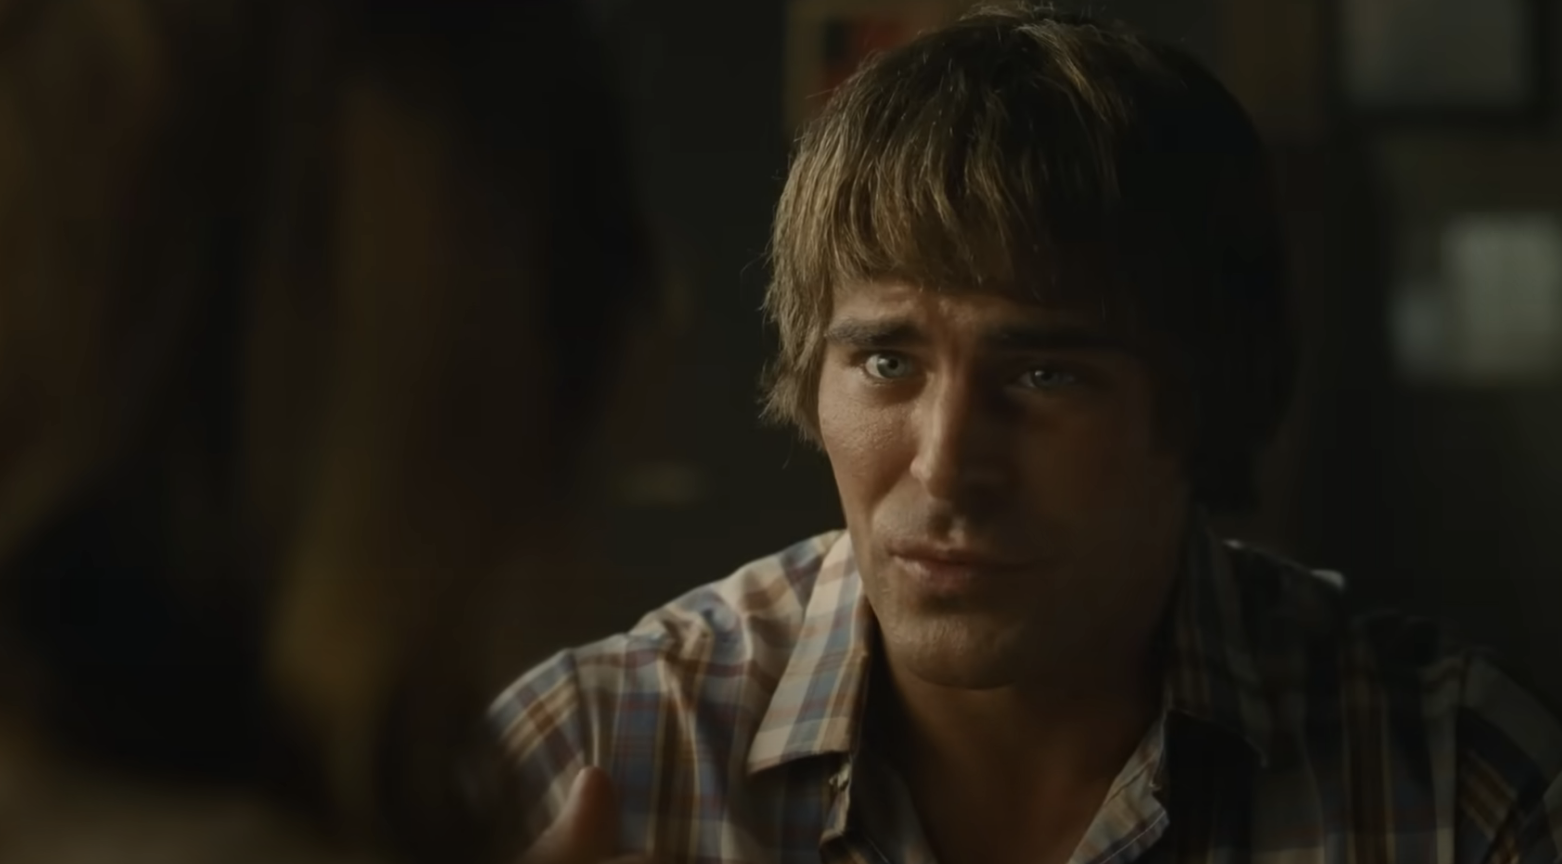 Close-up of Zac with bangs, looking distressed